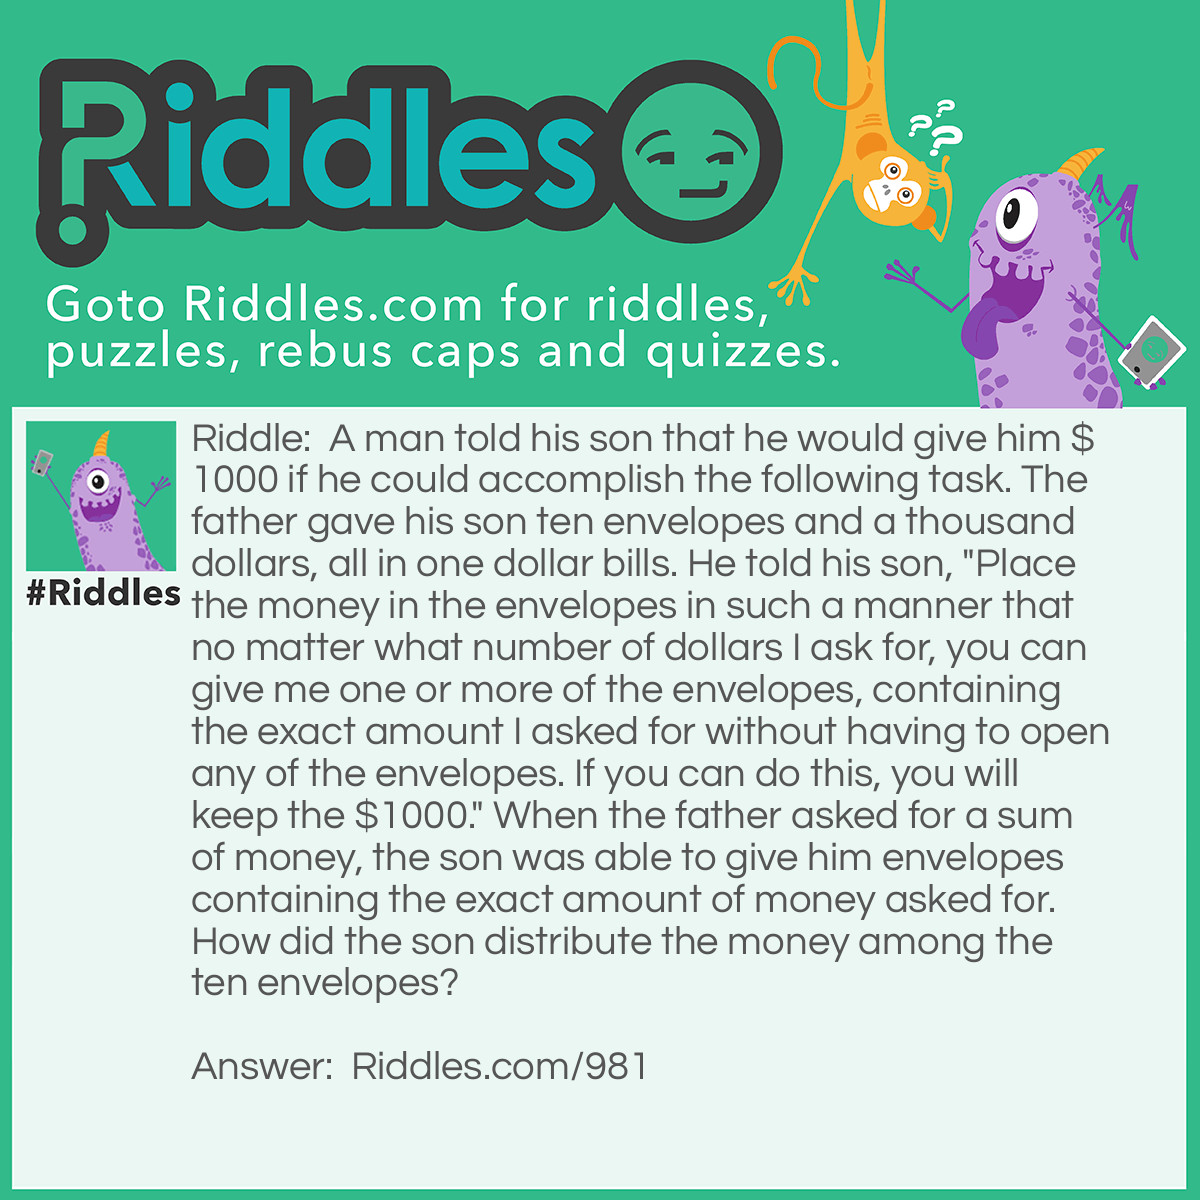 Riddle: A man told his son that he would give him $1000 if he could accomplish the following task. The father gave his son ten envelopes and a thousand dollars, all in one dollar bills. He told his son, "Place the money in the envelopes in such a manner that no matter what number of dollars I ask for, you can give me one or more of the envelopes, containing the exact amount I asked for without having to open any of the envelopes. If you can do this, you will keep the $1000." When the father asked for a sum of money, the son was able to give him envelopes containing the exact amount of money asked for. How did the son distribute the money among the ten envelopes? Answer: The contents or the ten envelopes (in dollar bills) should be as follows: $1, 2, 4, 8, 16, 32, 64, 128, 256, 489. The first nine numbers are in geometrical progression, and their sum, deducted from 1,000, gives the contents of the tenth envelope.